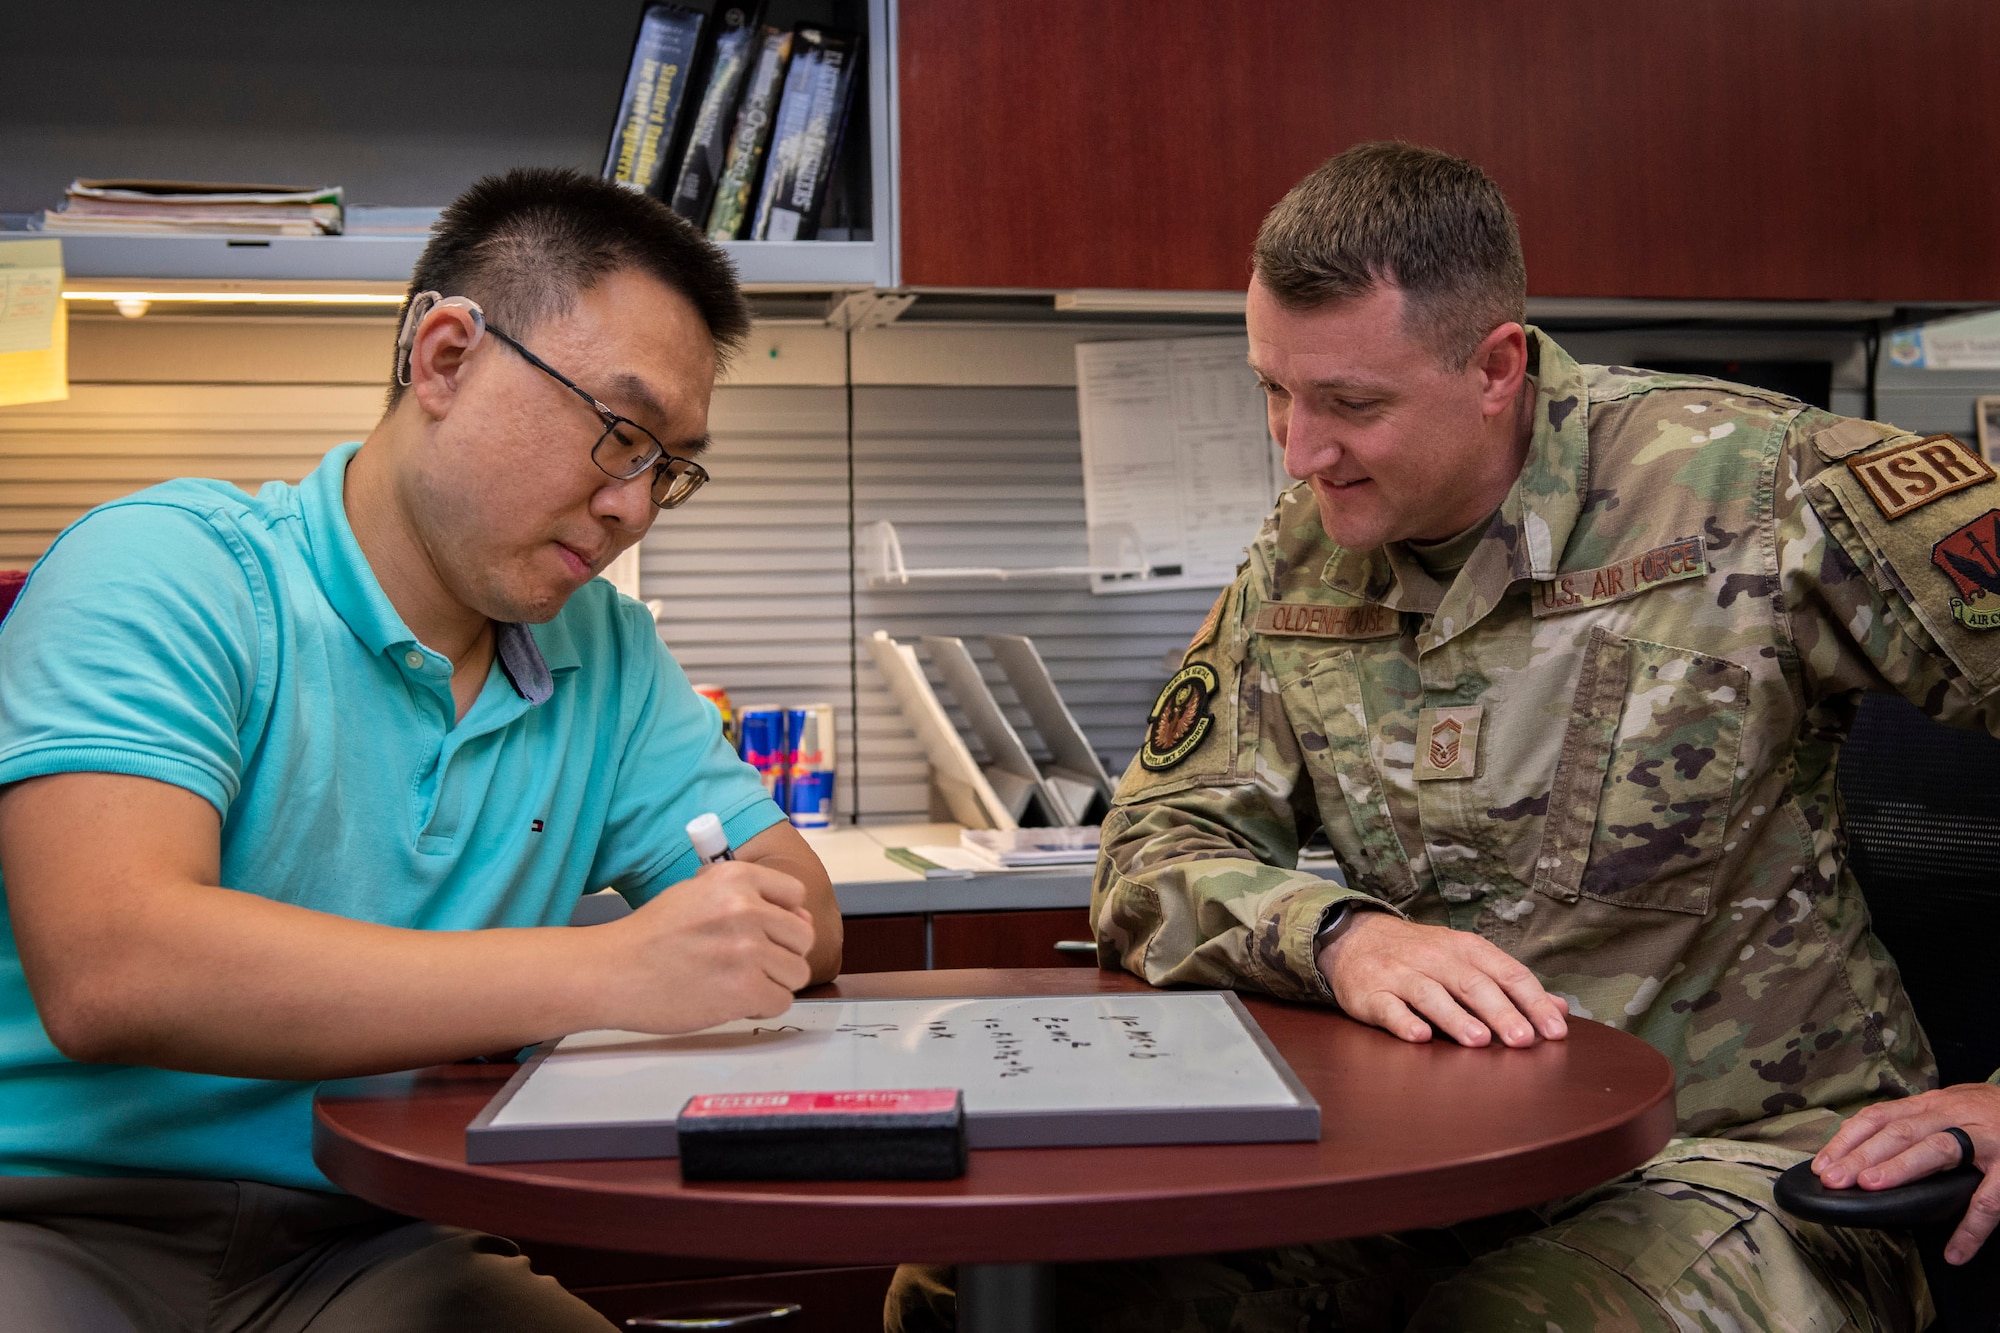 Le Chen, a statistician with the 21st Surveillance Squadron at Patrick Space Force Base, Fla., communicates with Senior Master Sgt. David M. Oldenhouse, 21st SURS Senior Enlisted Leader, using a white board and dry erase marker.  Chen is a hearing-impaired employee at the Air Force Technical Applications Center and uses a variety of methods to communicate with his coworkers.  (U.S. Air Force photo by Matthew S. Jurgens.)